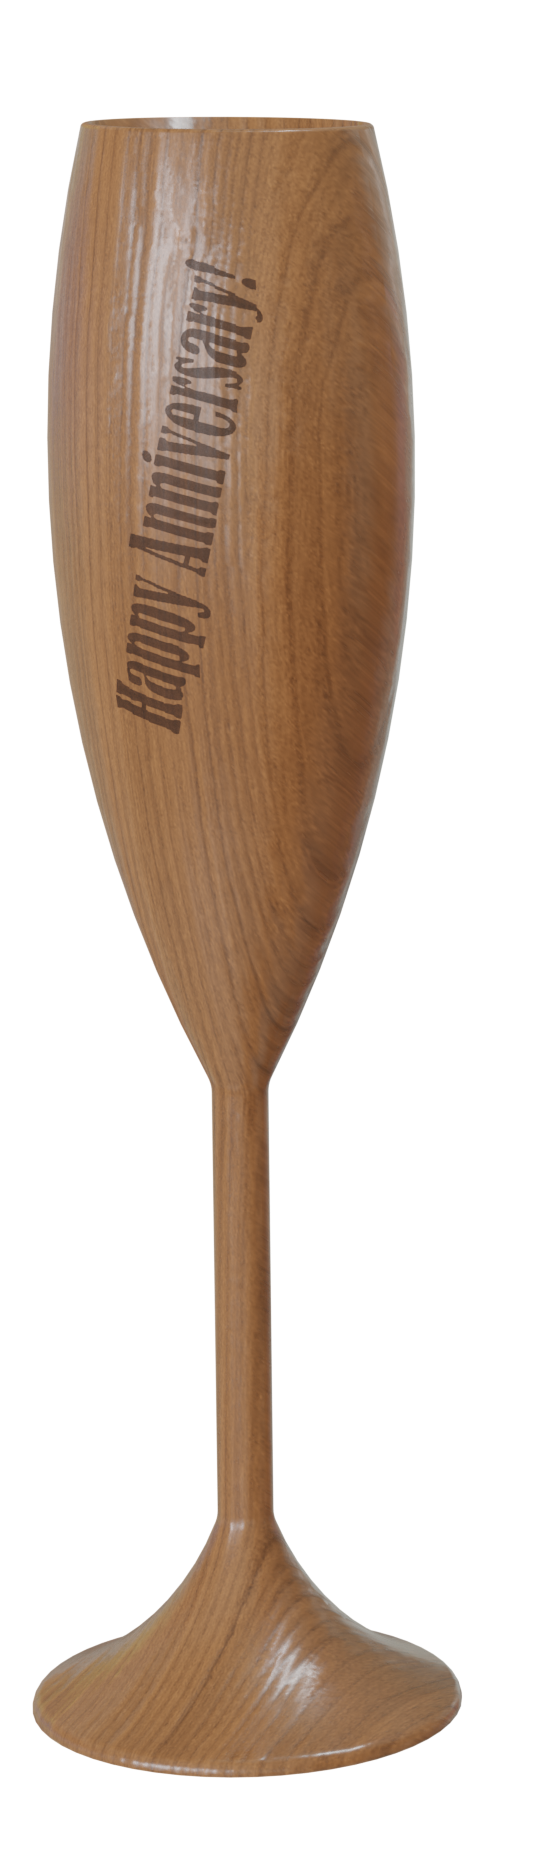 Classic-maple-engrave-cup-tall